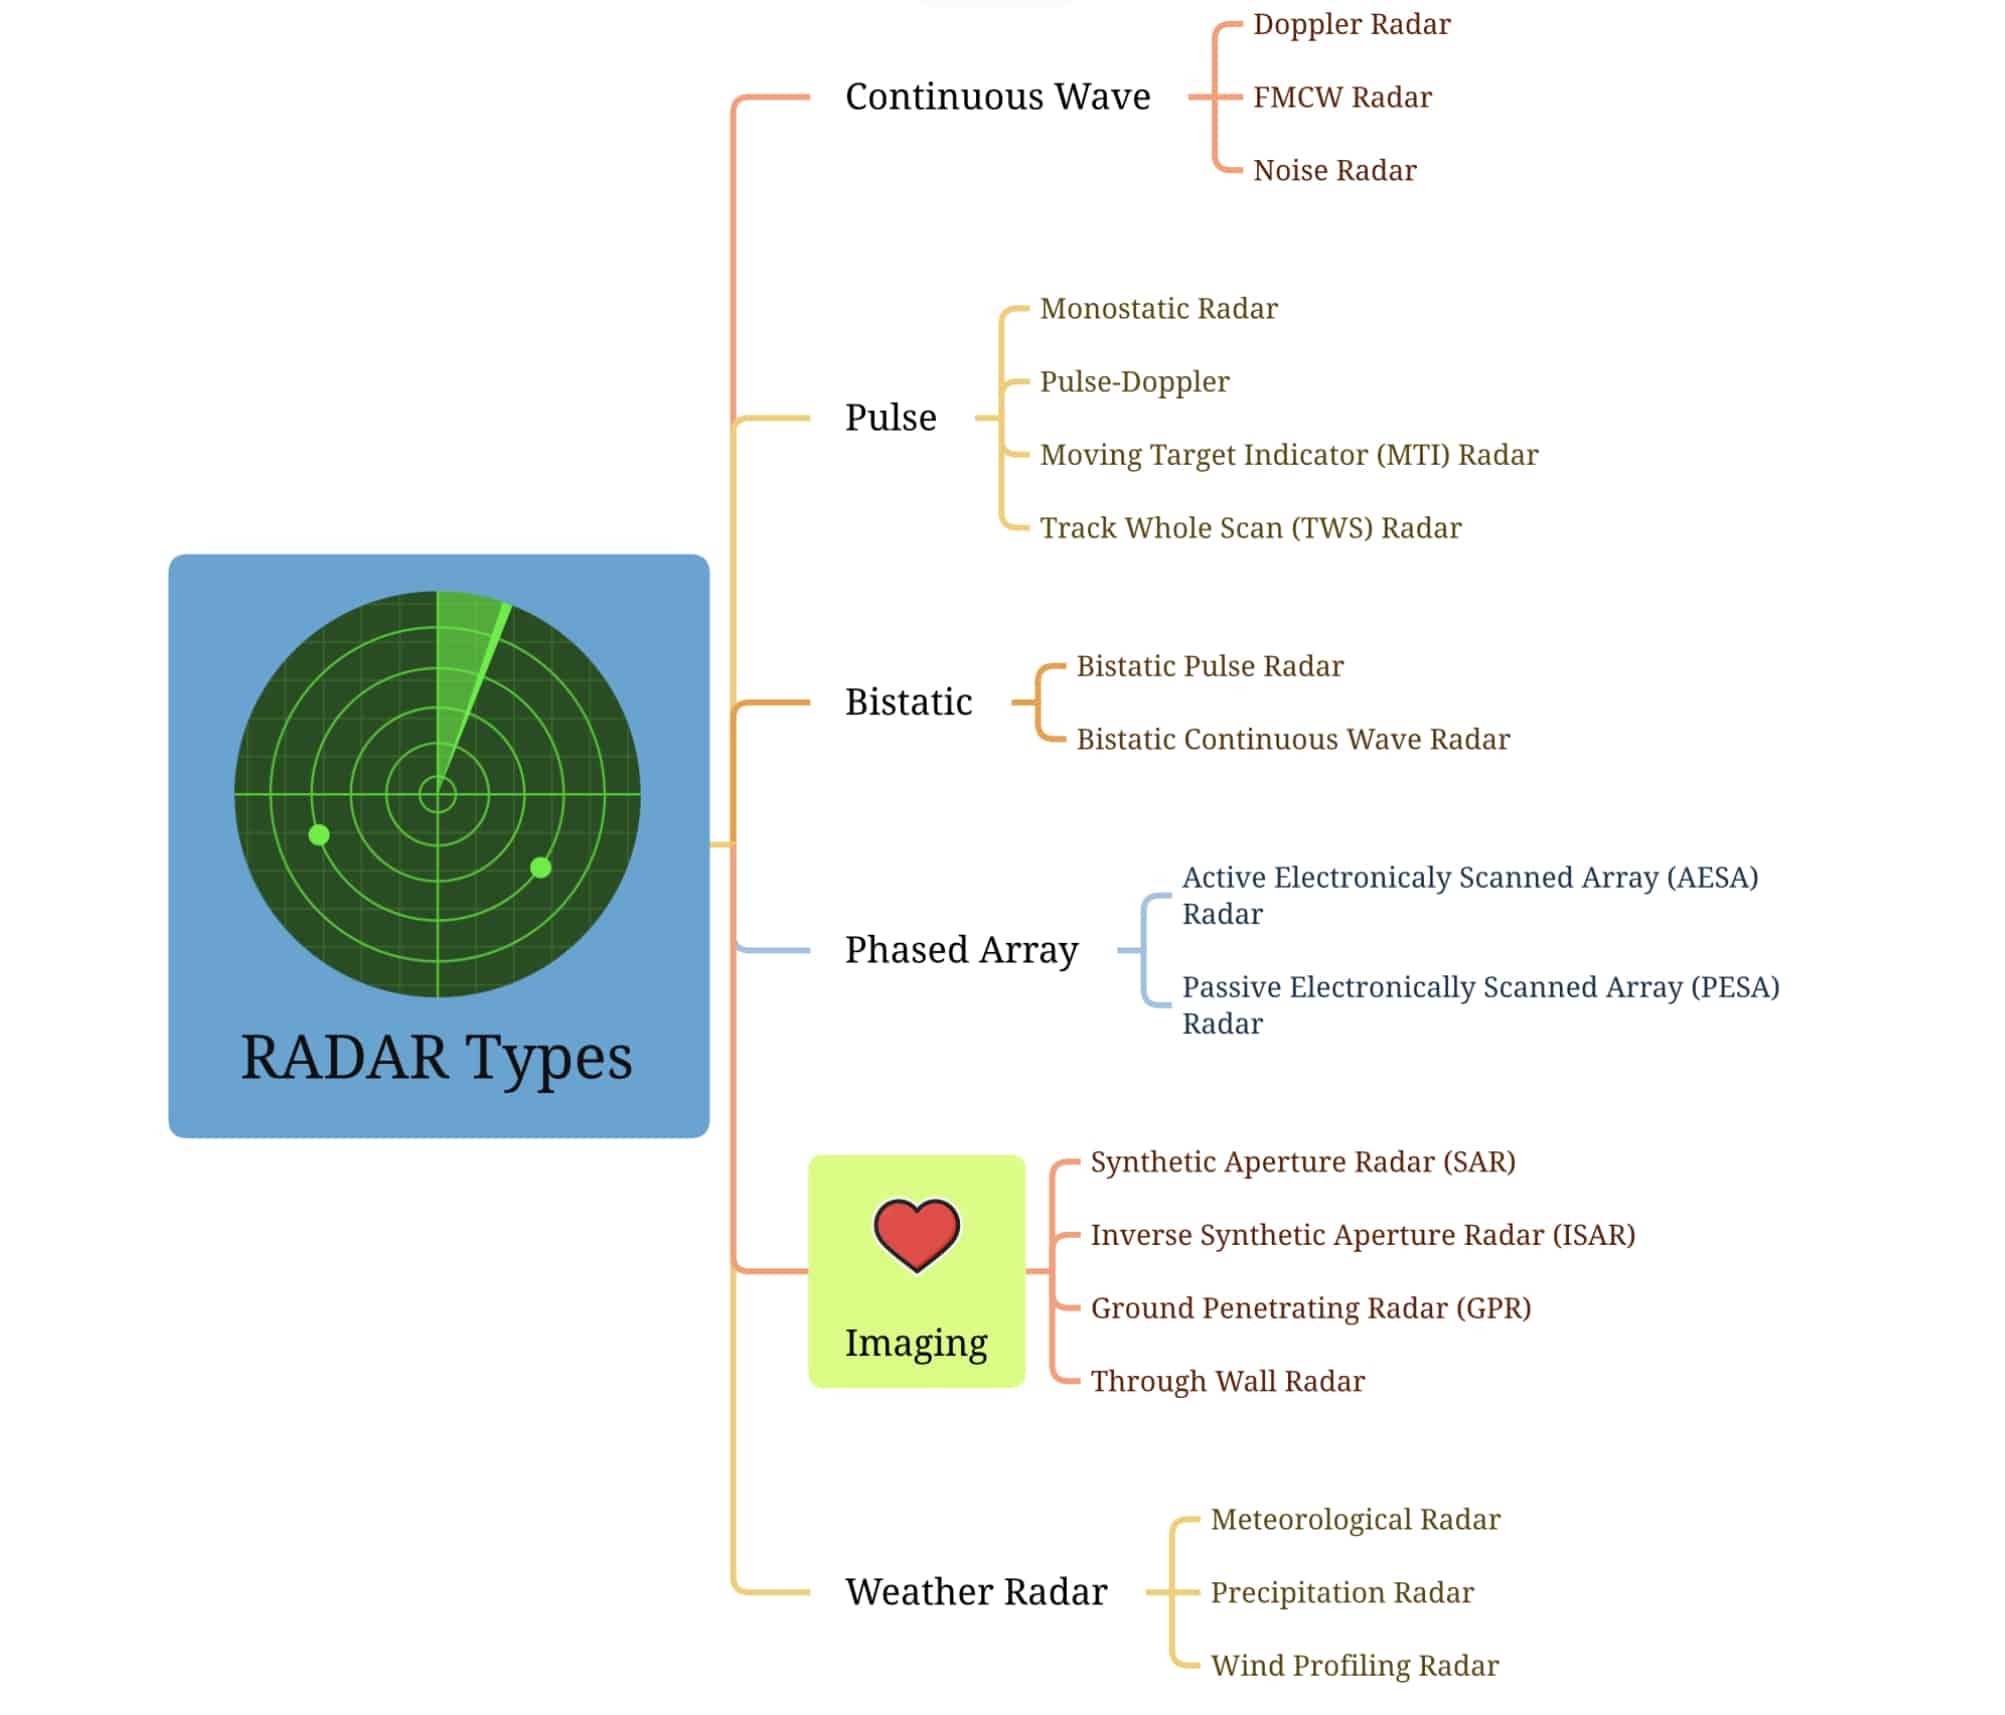 RADAR On Steroids: Why the Imaging RADAR is the future of self-driving cars